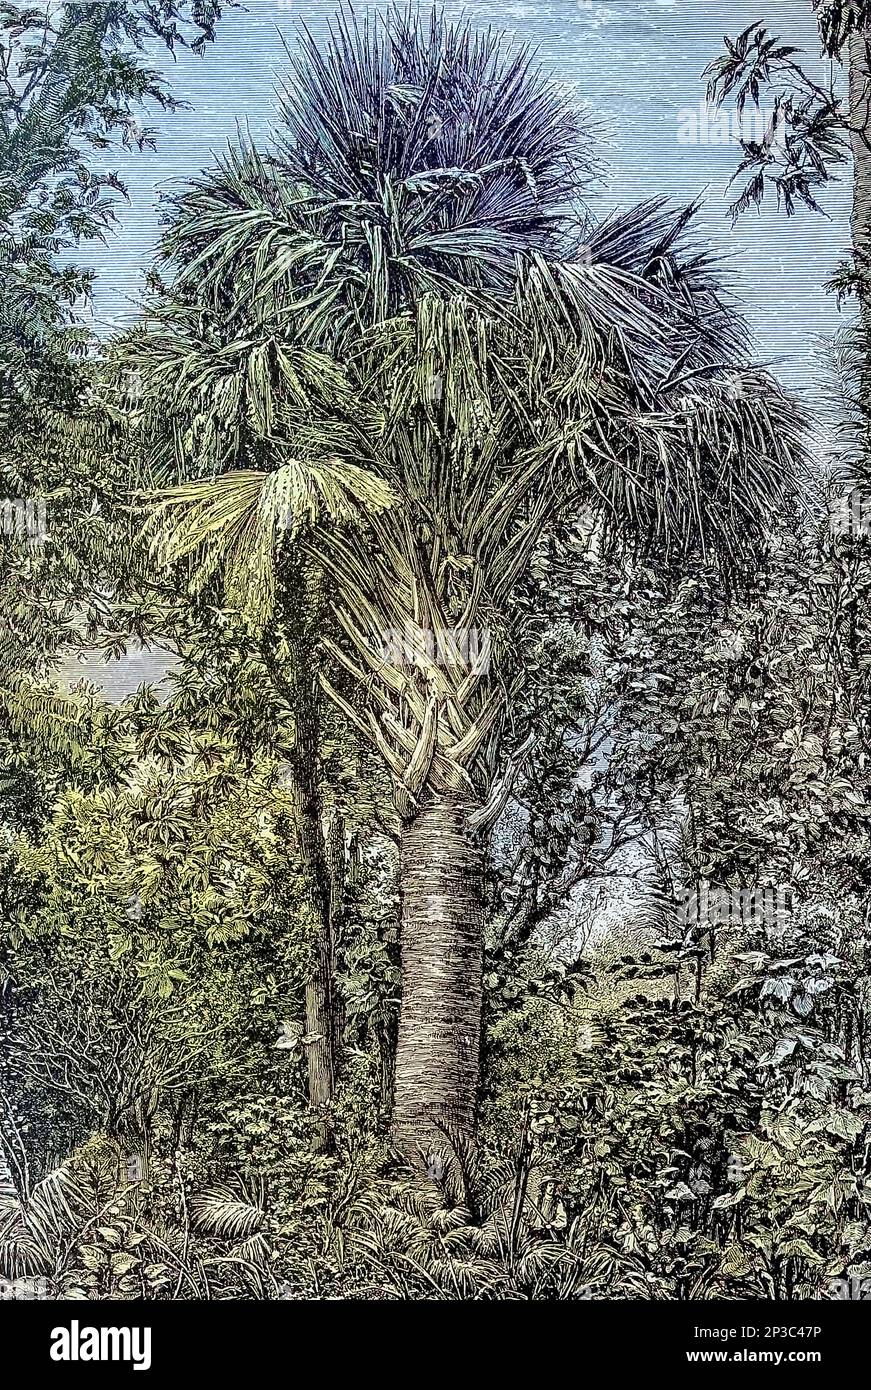 Grand Palm of Celebes Drawn by H. Catenacci Chapter XXI - The Malays from Cyclopedia universal history : embracing the most complete and recent presentation of the subject in two principal parts or divisions of more than six thousand pages by John Clark Ridpath, 1840-1900 Publication date 1895 Publisher Boston : Balch Bros. Volume 6 History of Man and Mankind Stock Photo